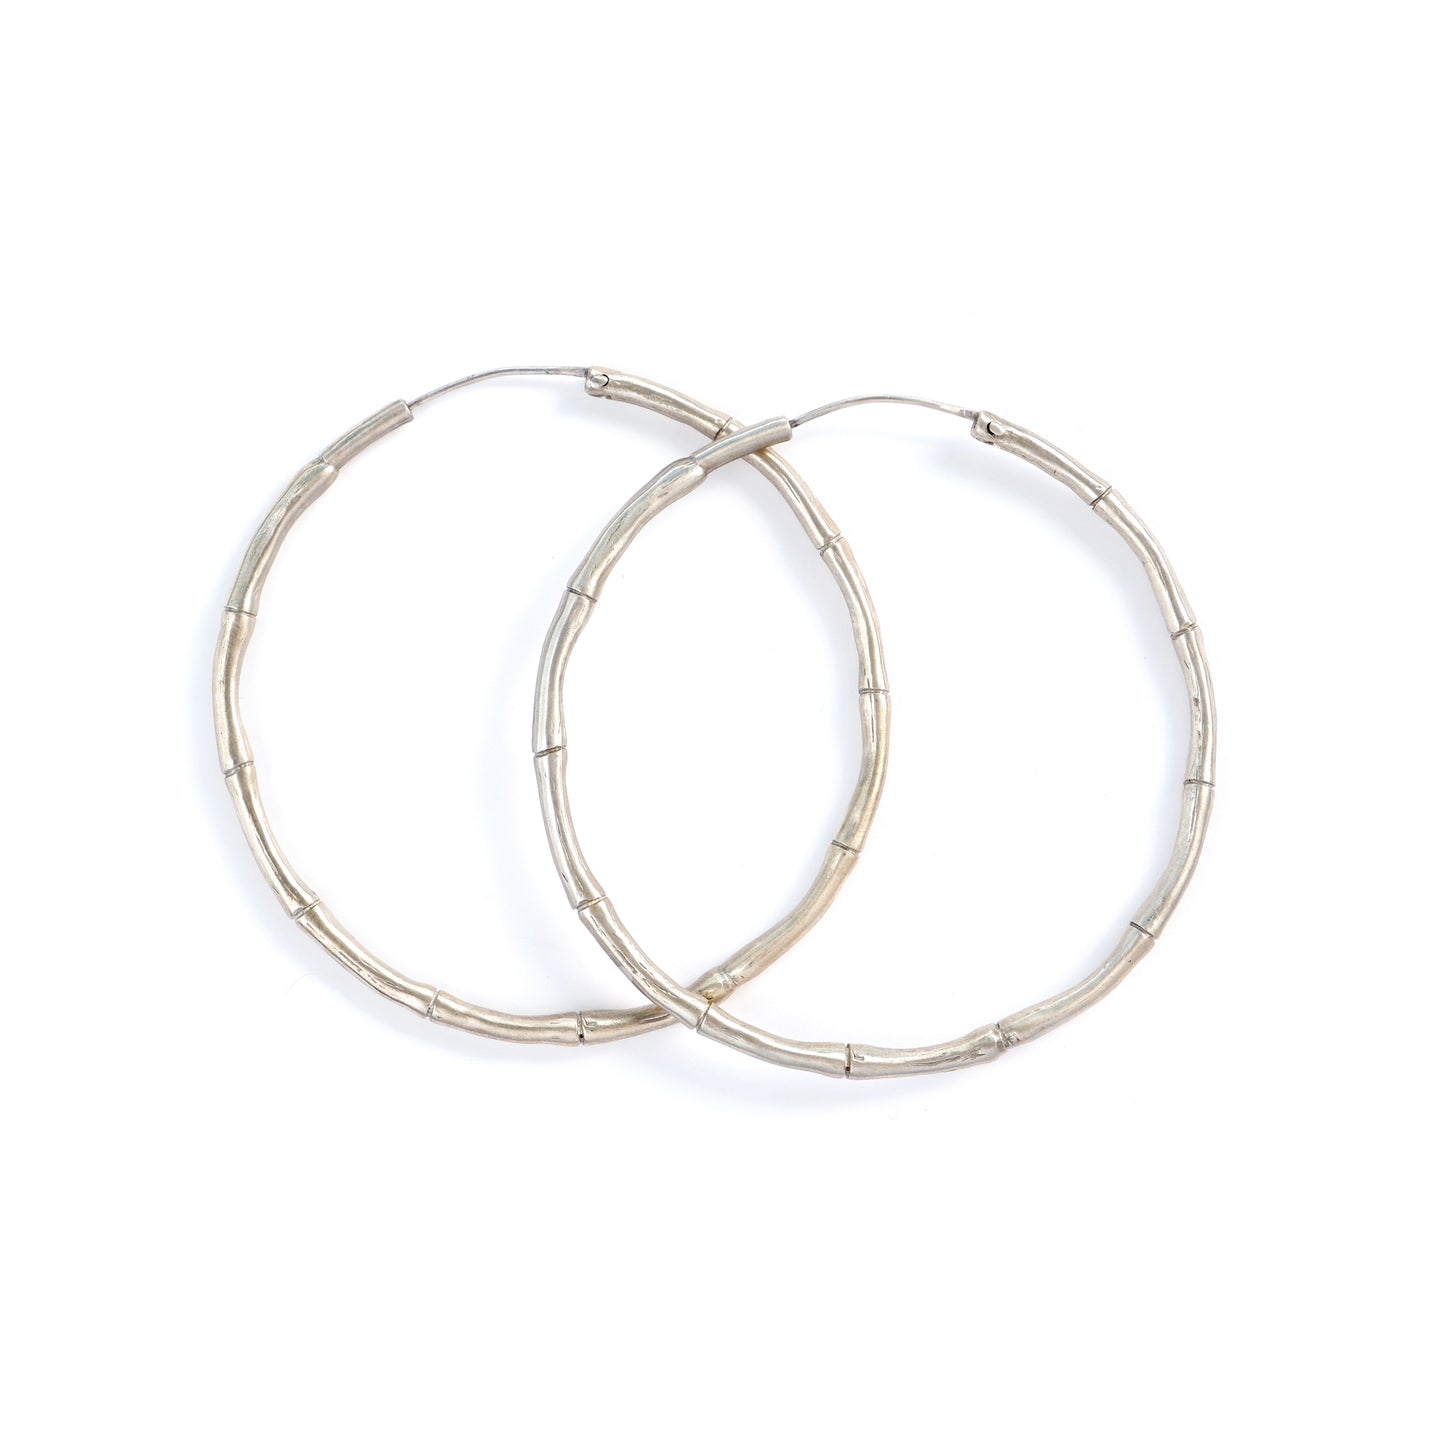 Bamboo Hoops large size, solid sterling silver hula hoops